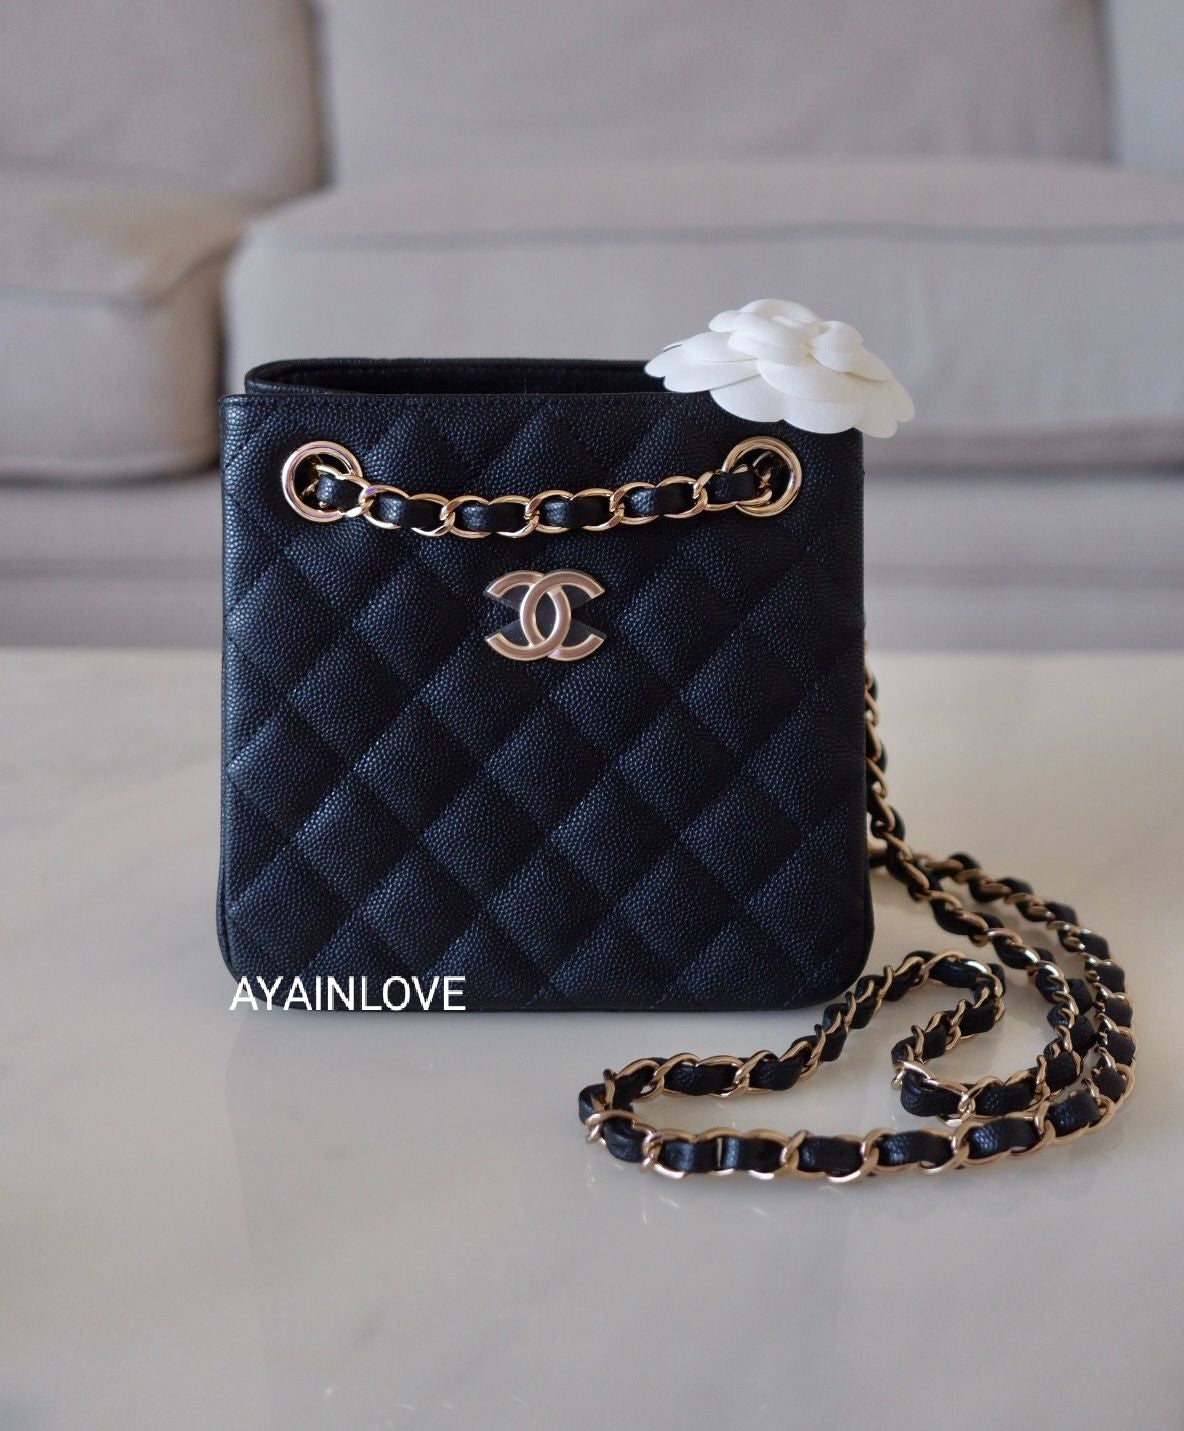 CHANEL Caviar Quilted Rolled Up Bucket Drawstring Bag Navy 452818   FASHIONPHILE